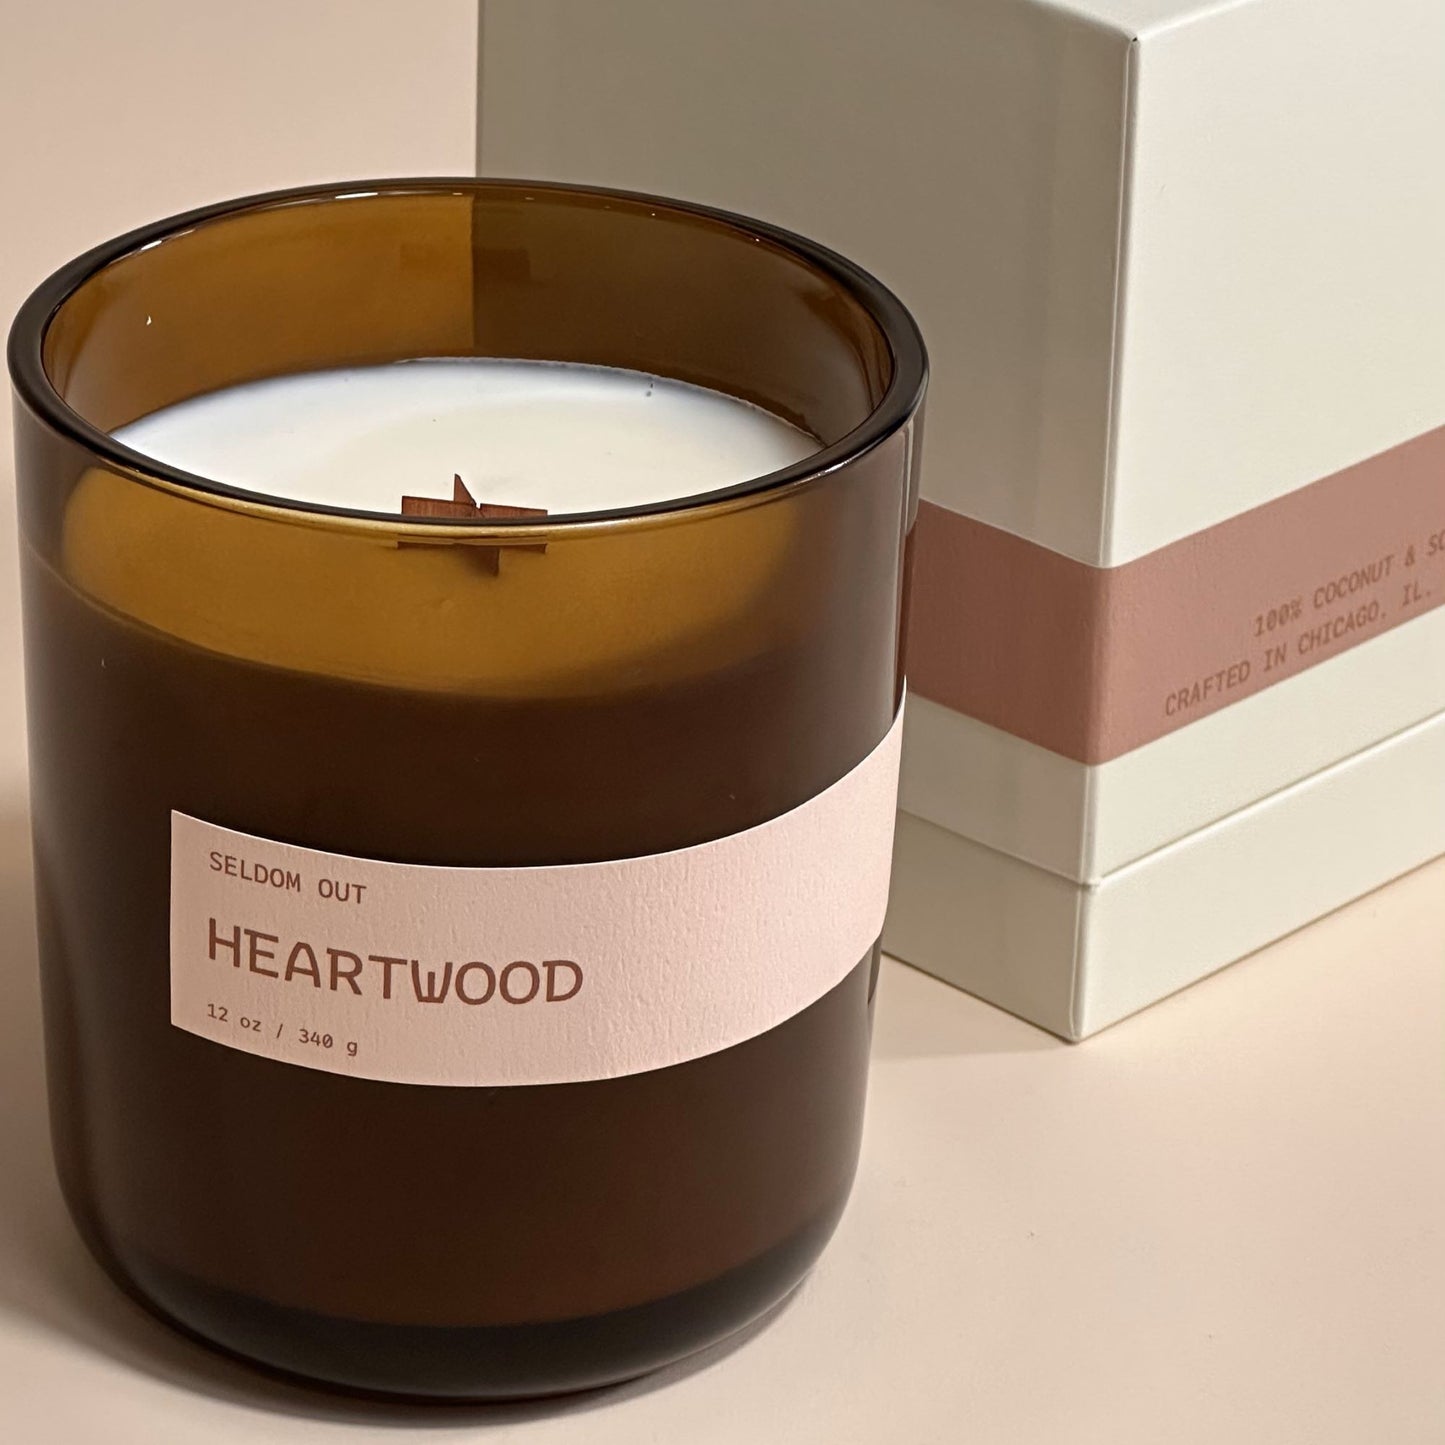 Heartwood - 12oz Candle